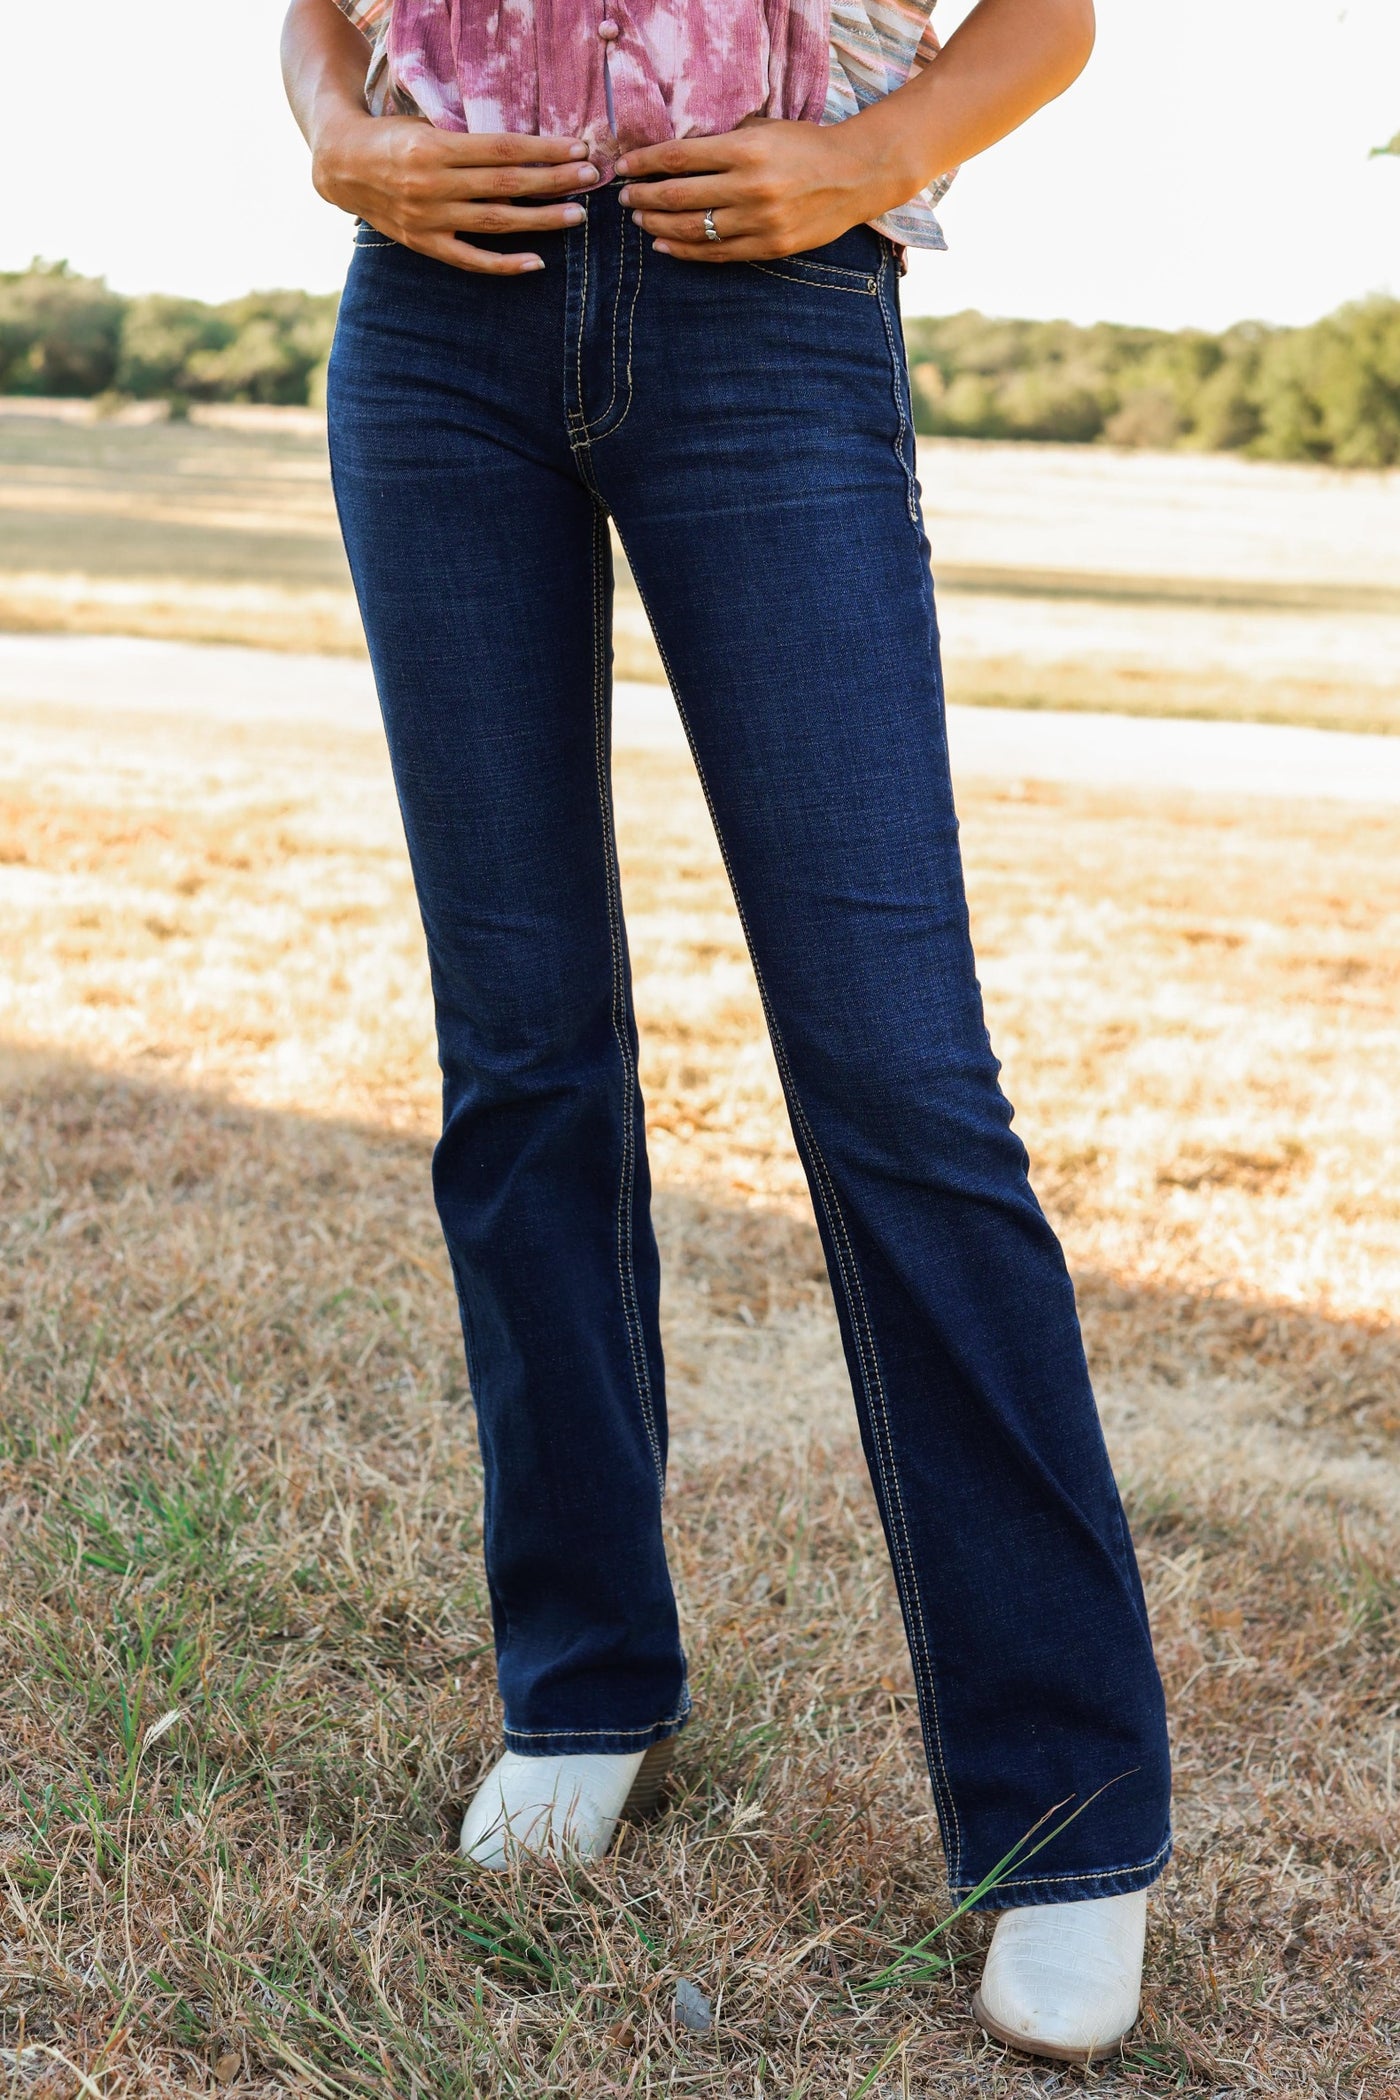 The Courtney Midrise Bootcut Jean